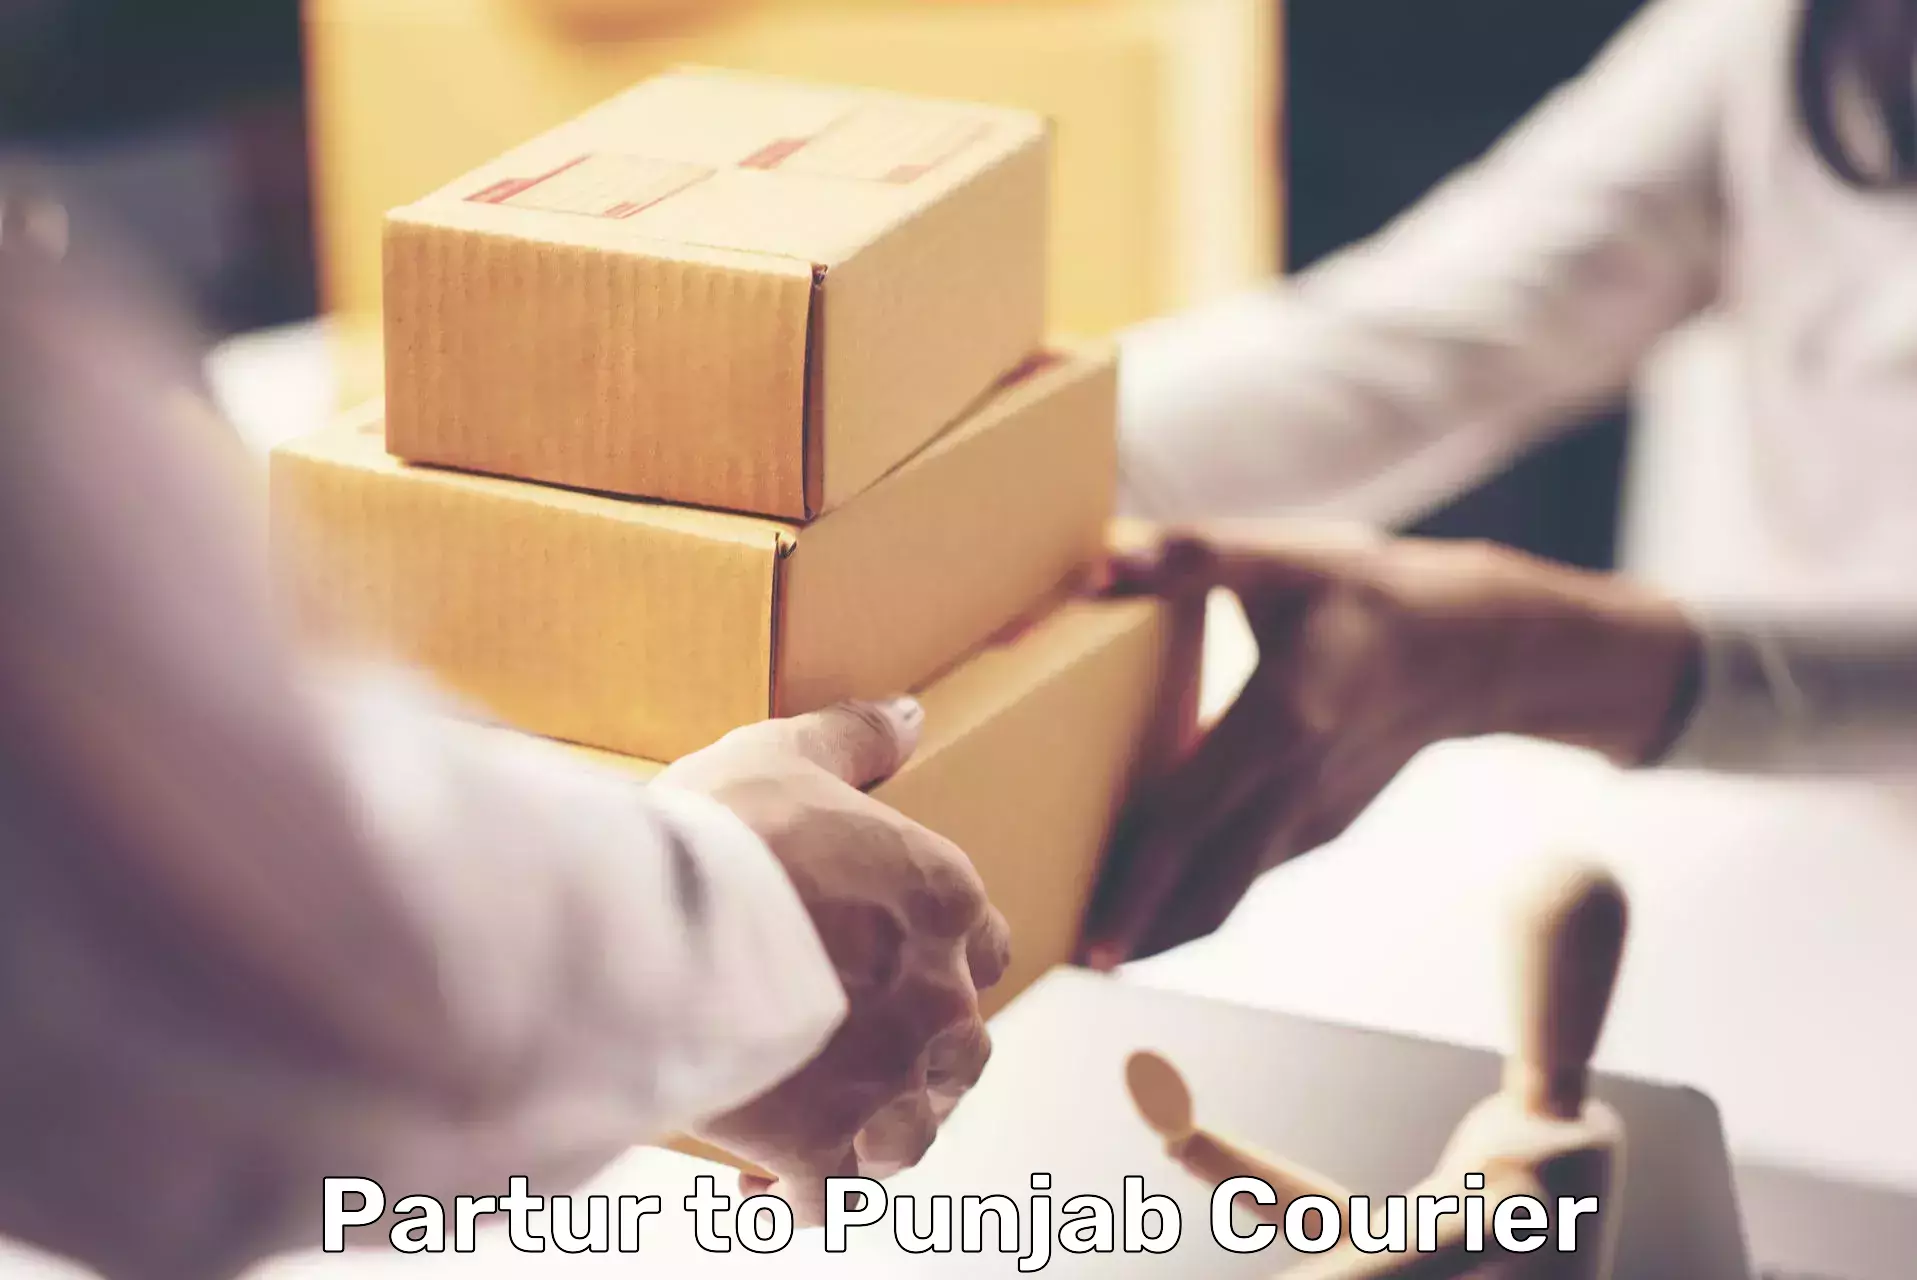 Secure package delivery in Partur to Dhilwan